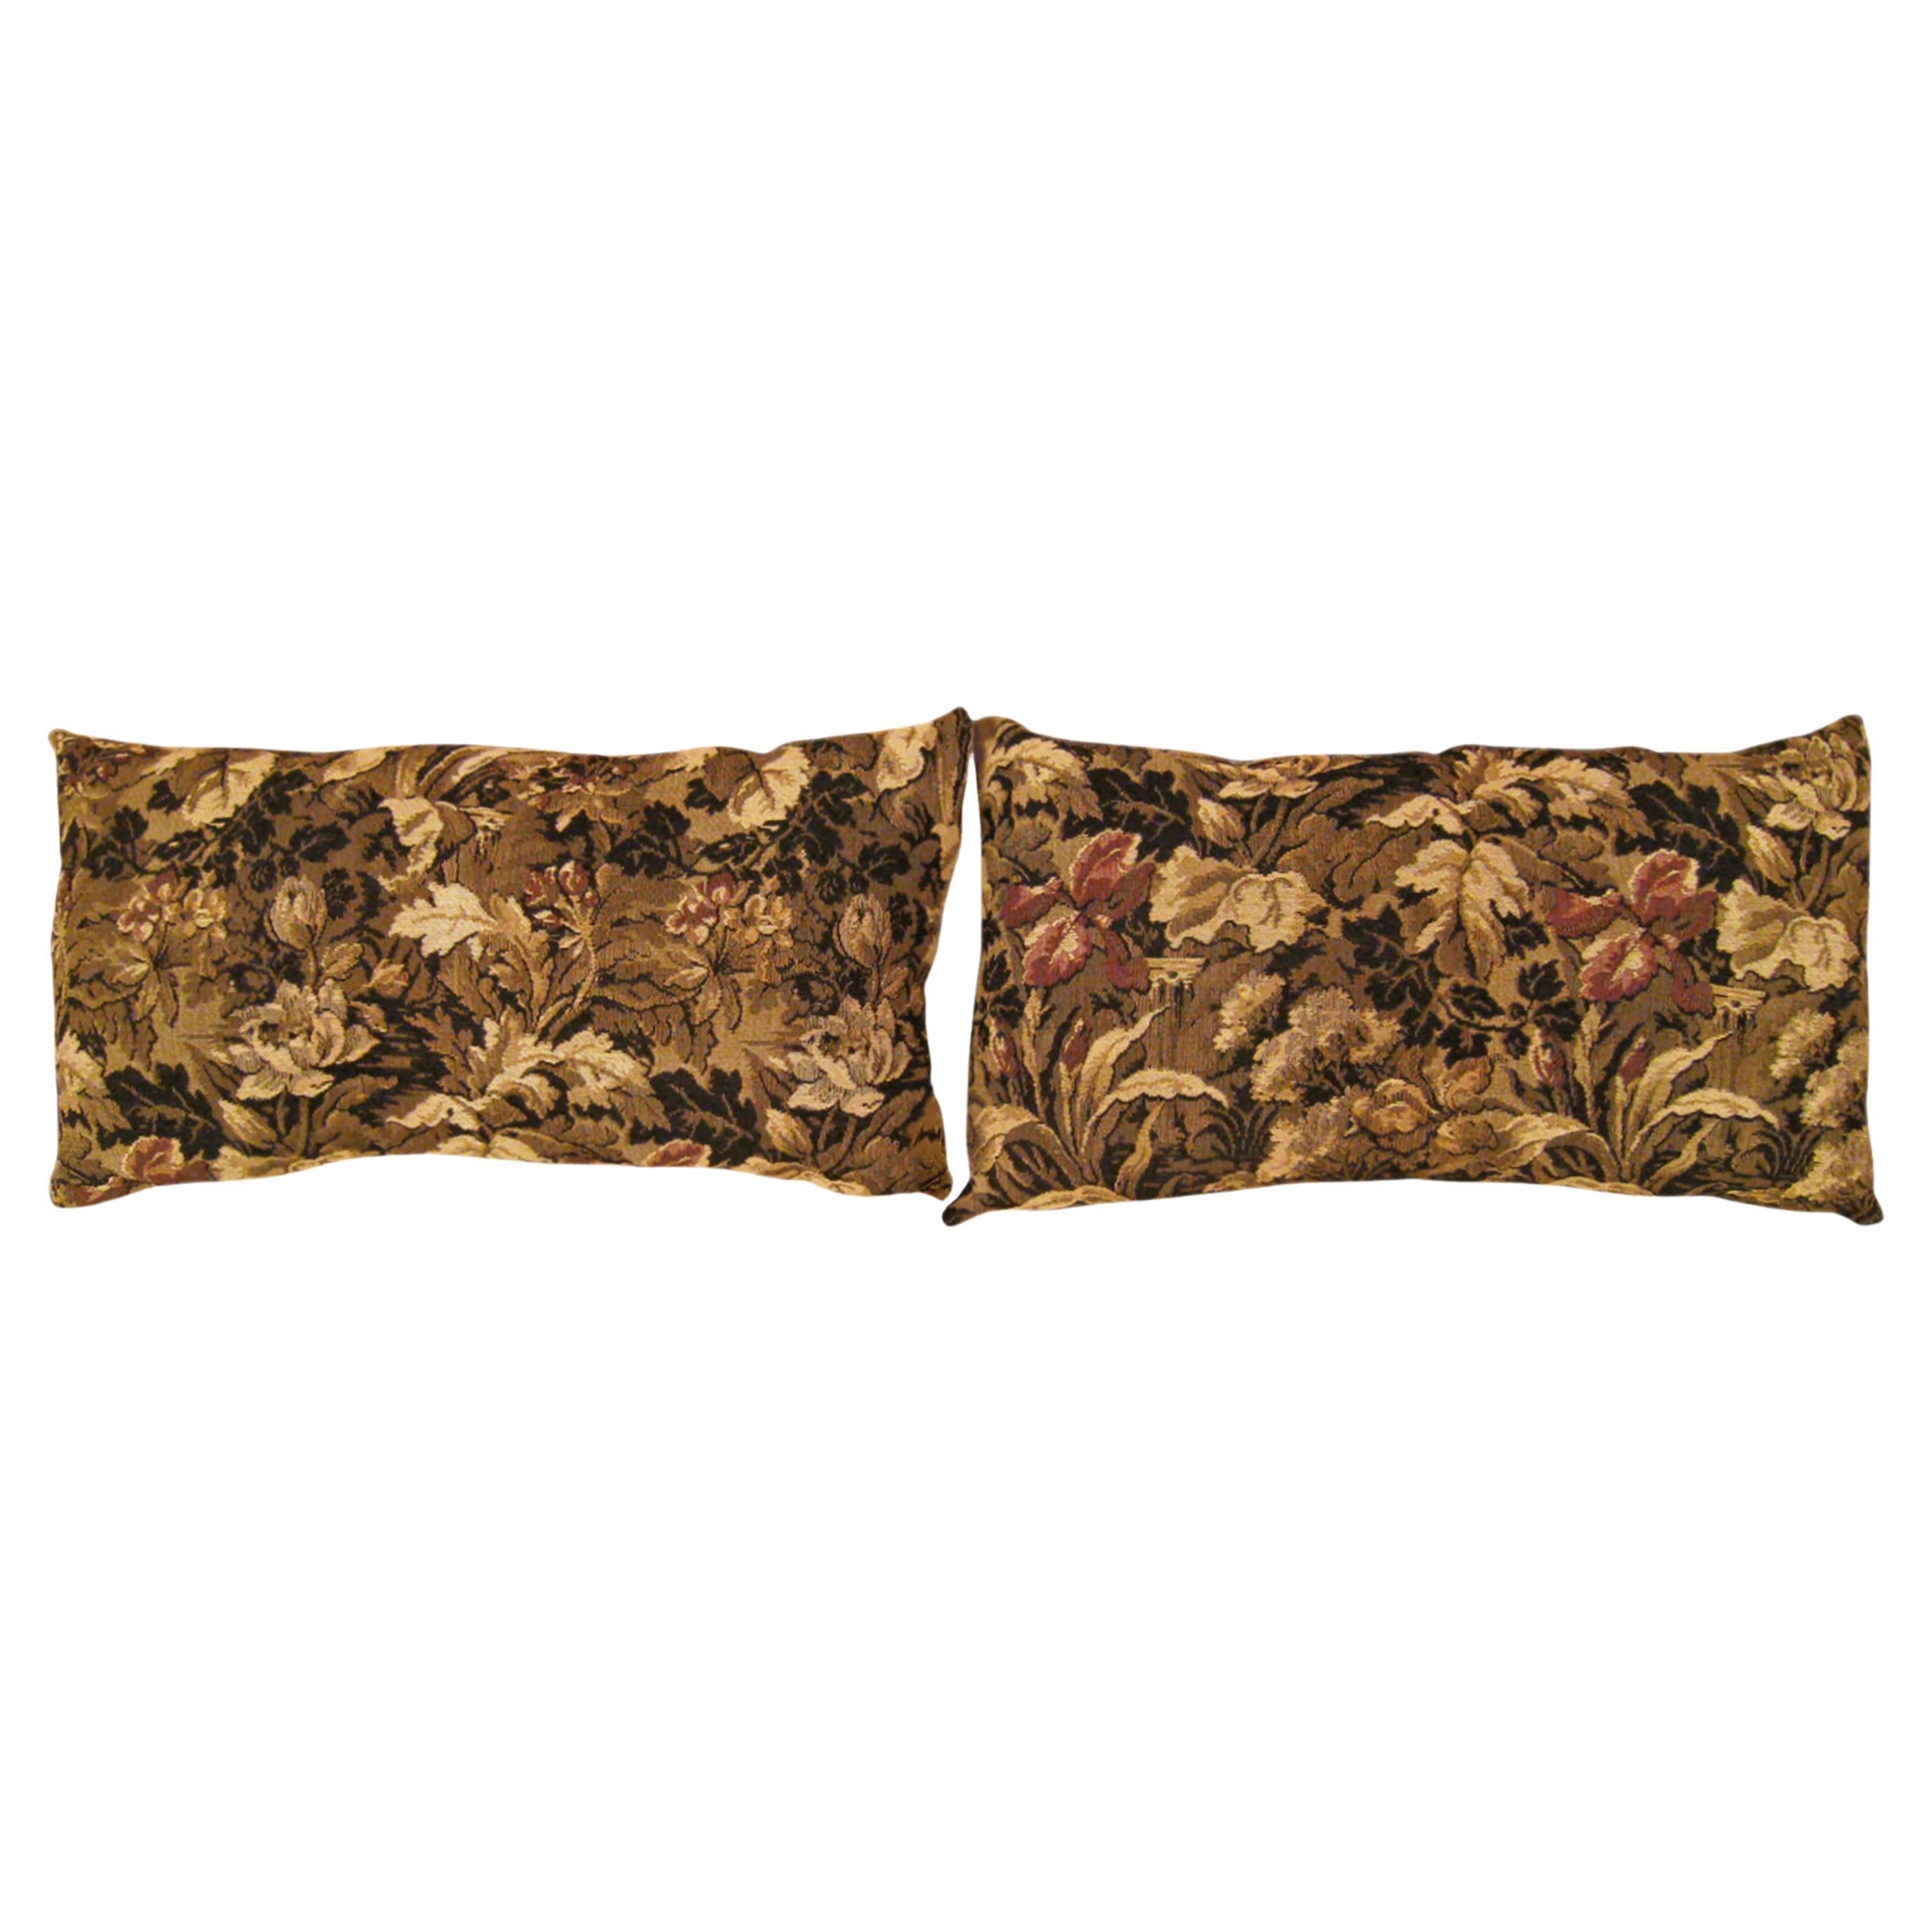 Pair of Decorative Antique Jacquard Tapestry Pillows with a Garden Design For Sale